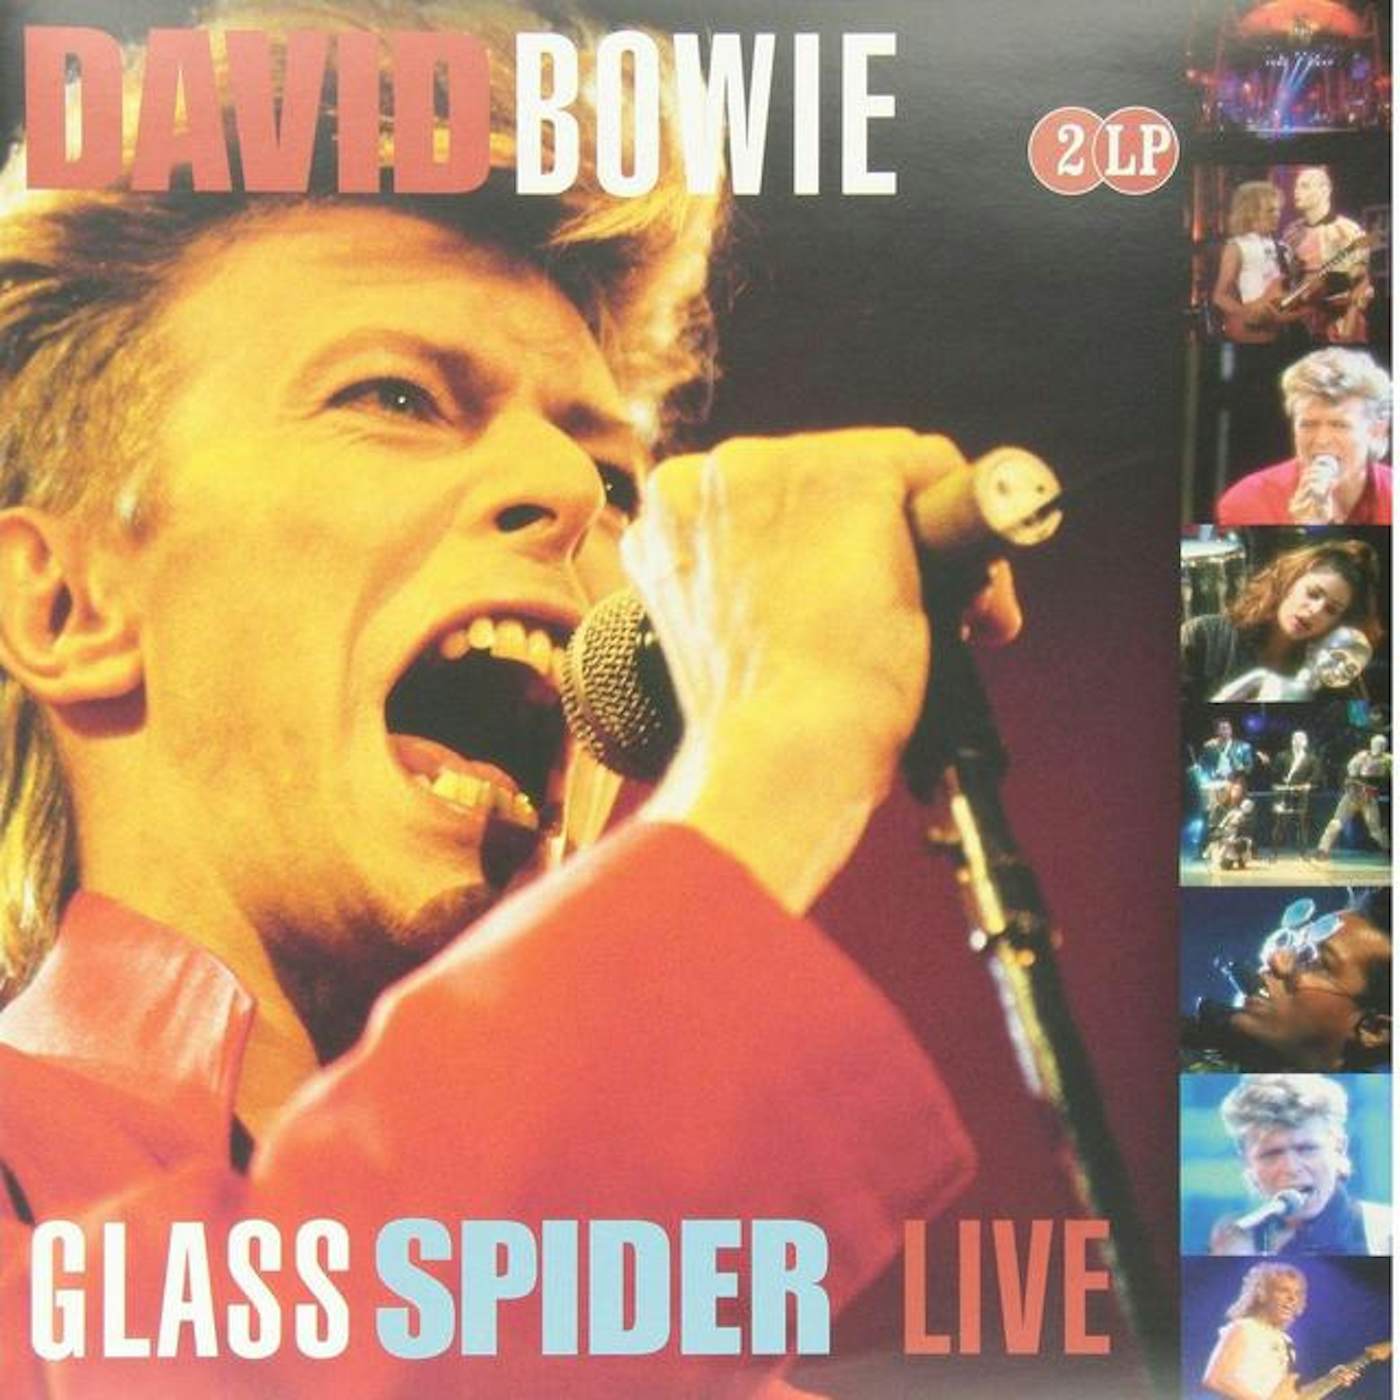 David Bowie GLASS SPIDER LIVE Vinyl Record - Holland Release